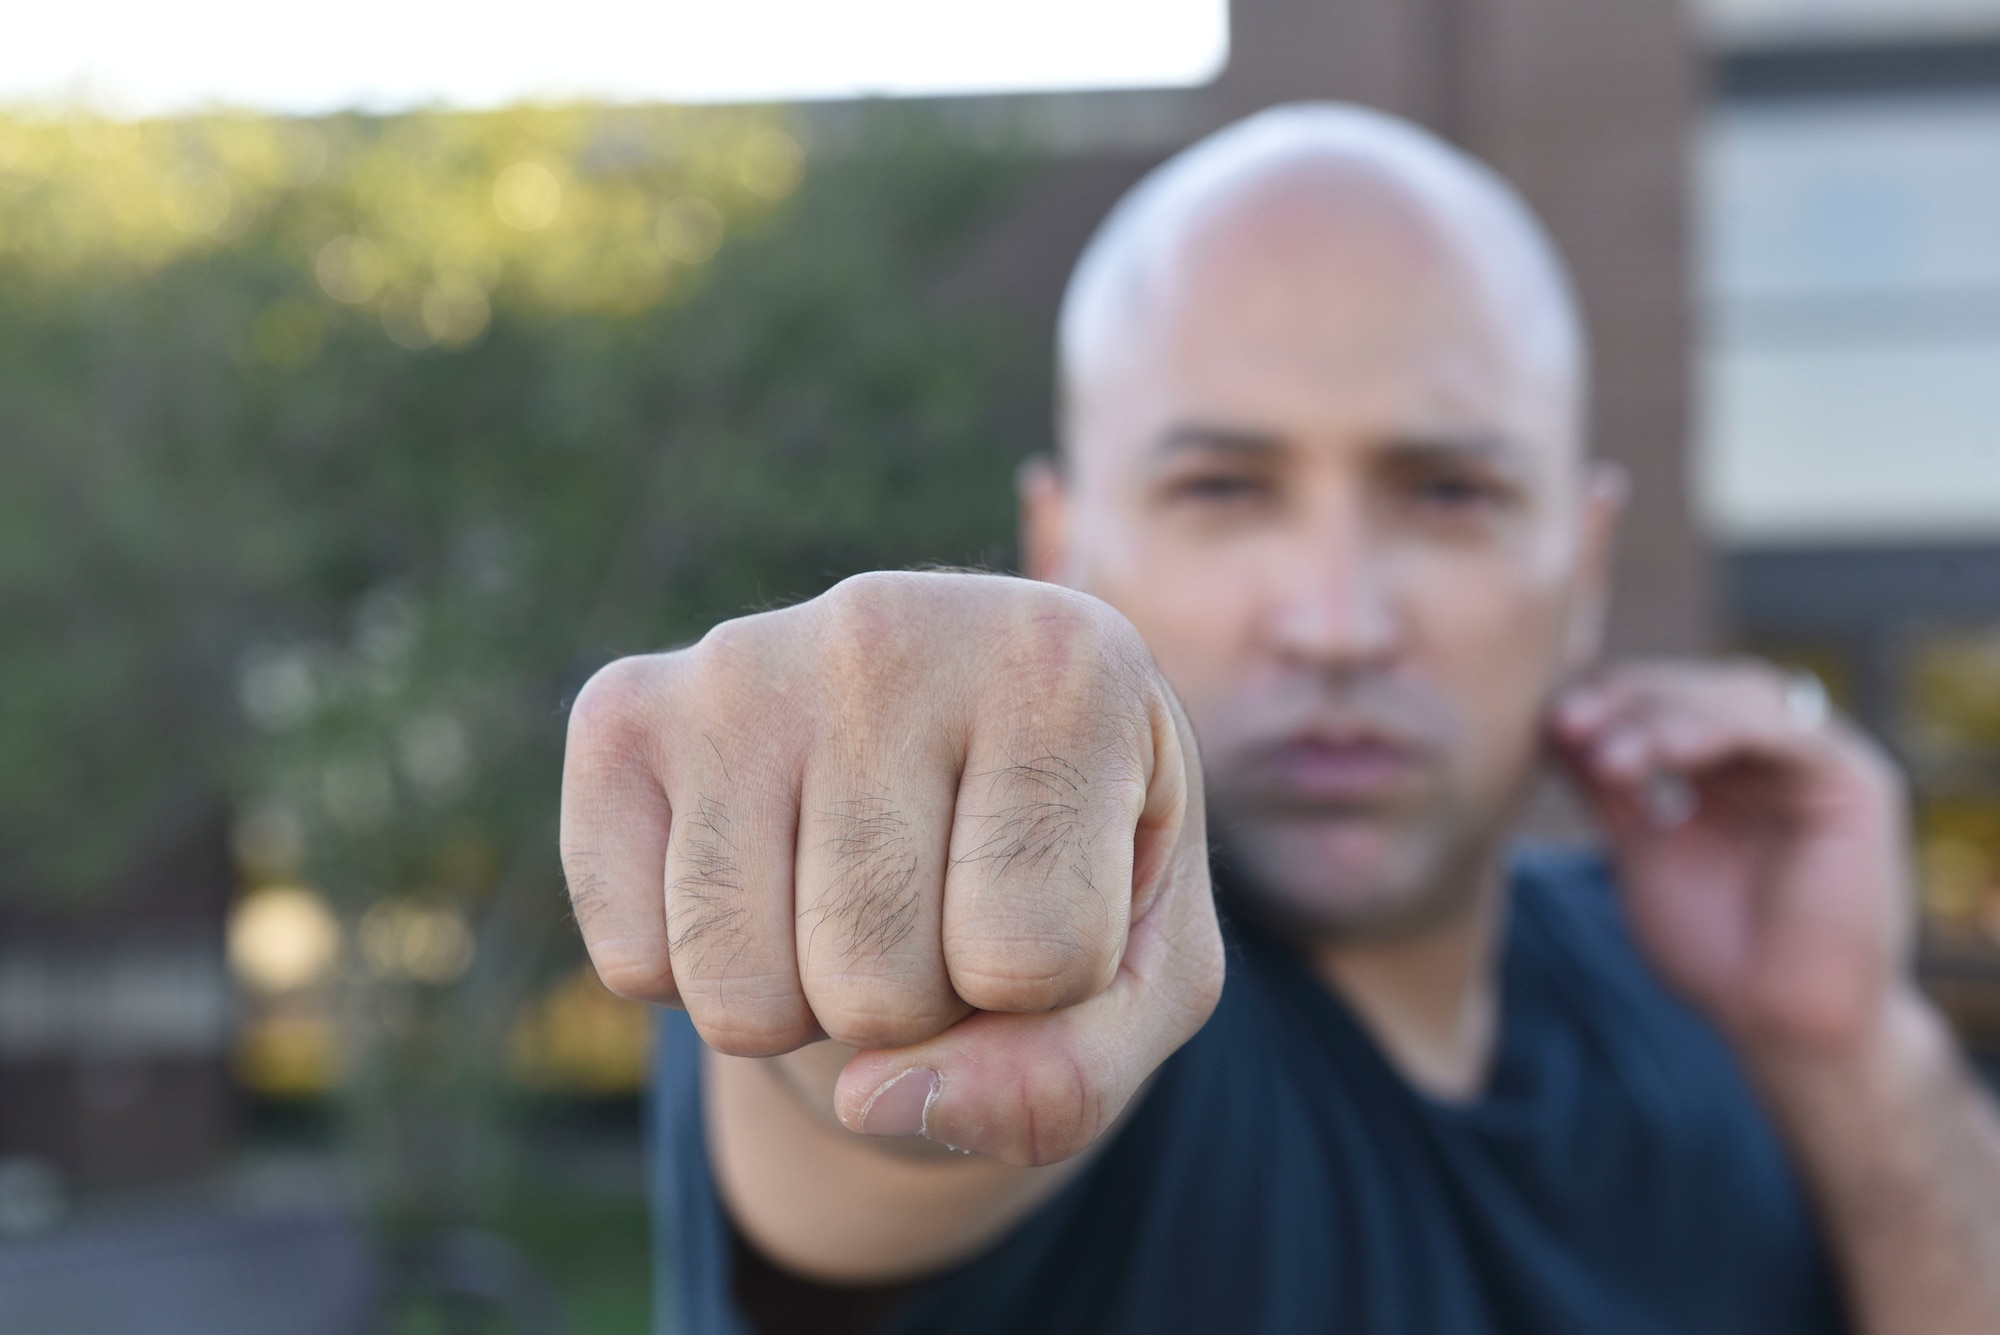 Staff Sergeant David Correa punches towards the camera while wearing a black t-shirt.